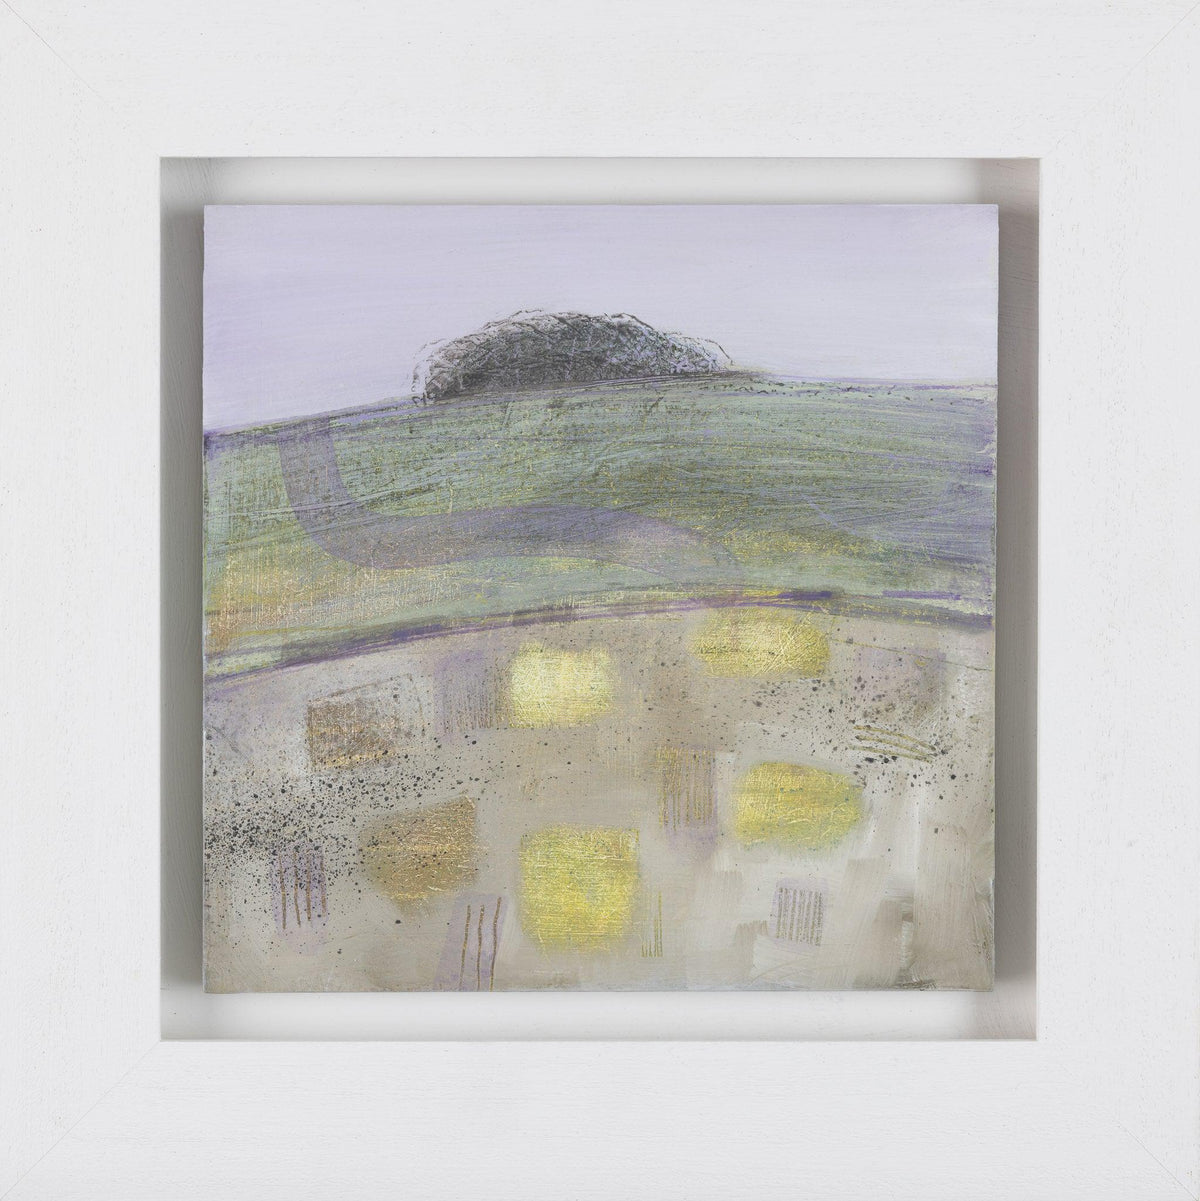 ‘The patchy field&#39; oil on board by Ruth Taylor, available at Padstow Gallery, Cornwall